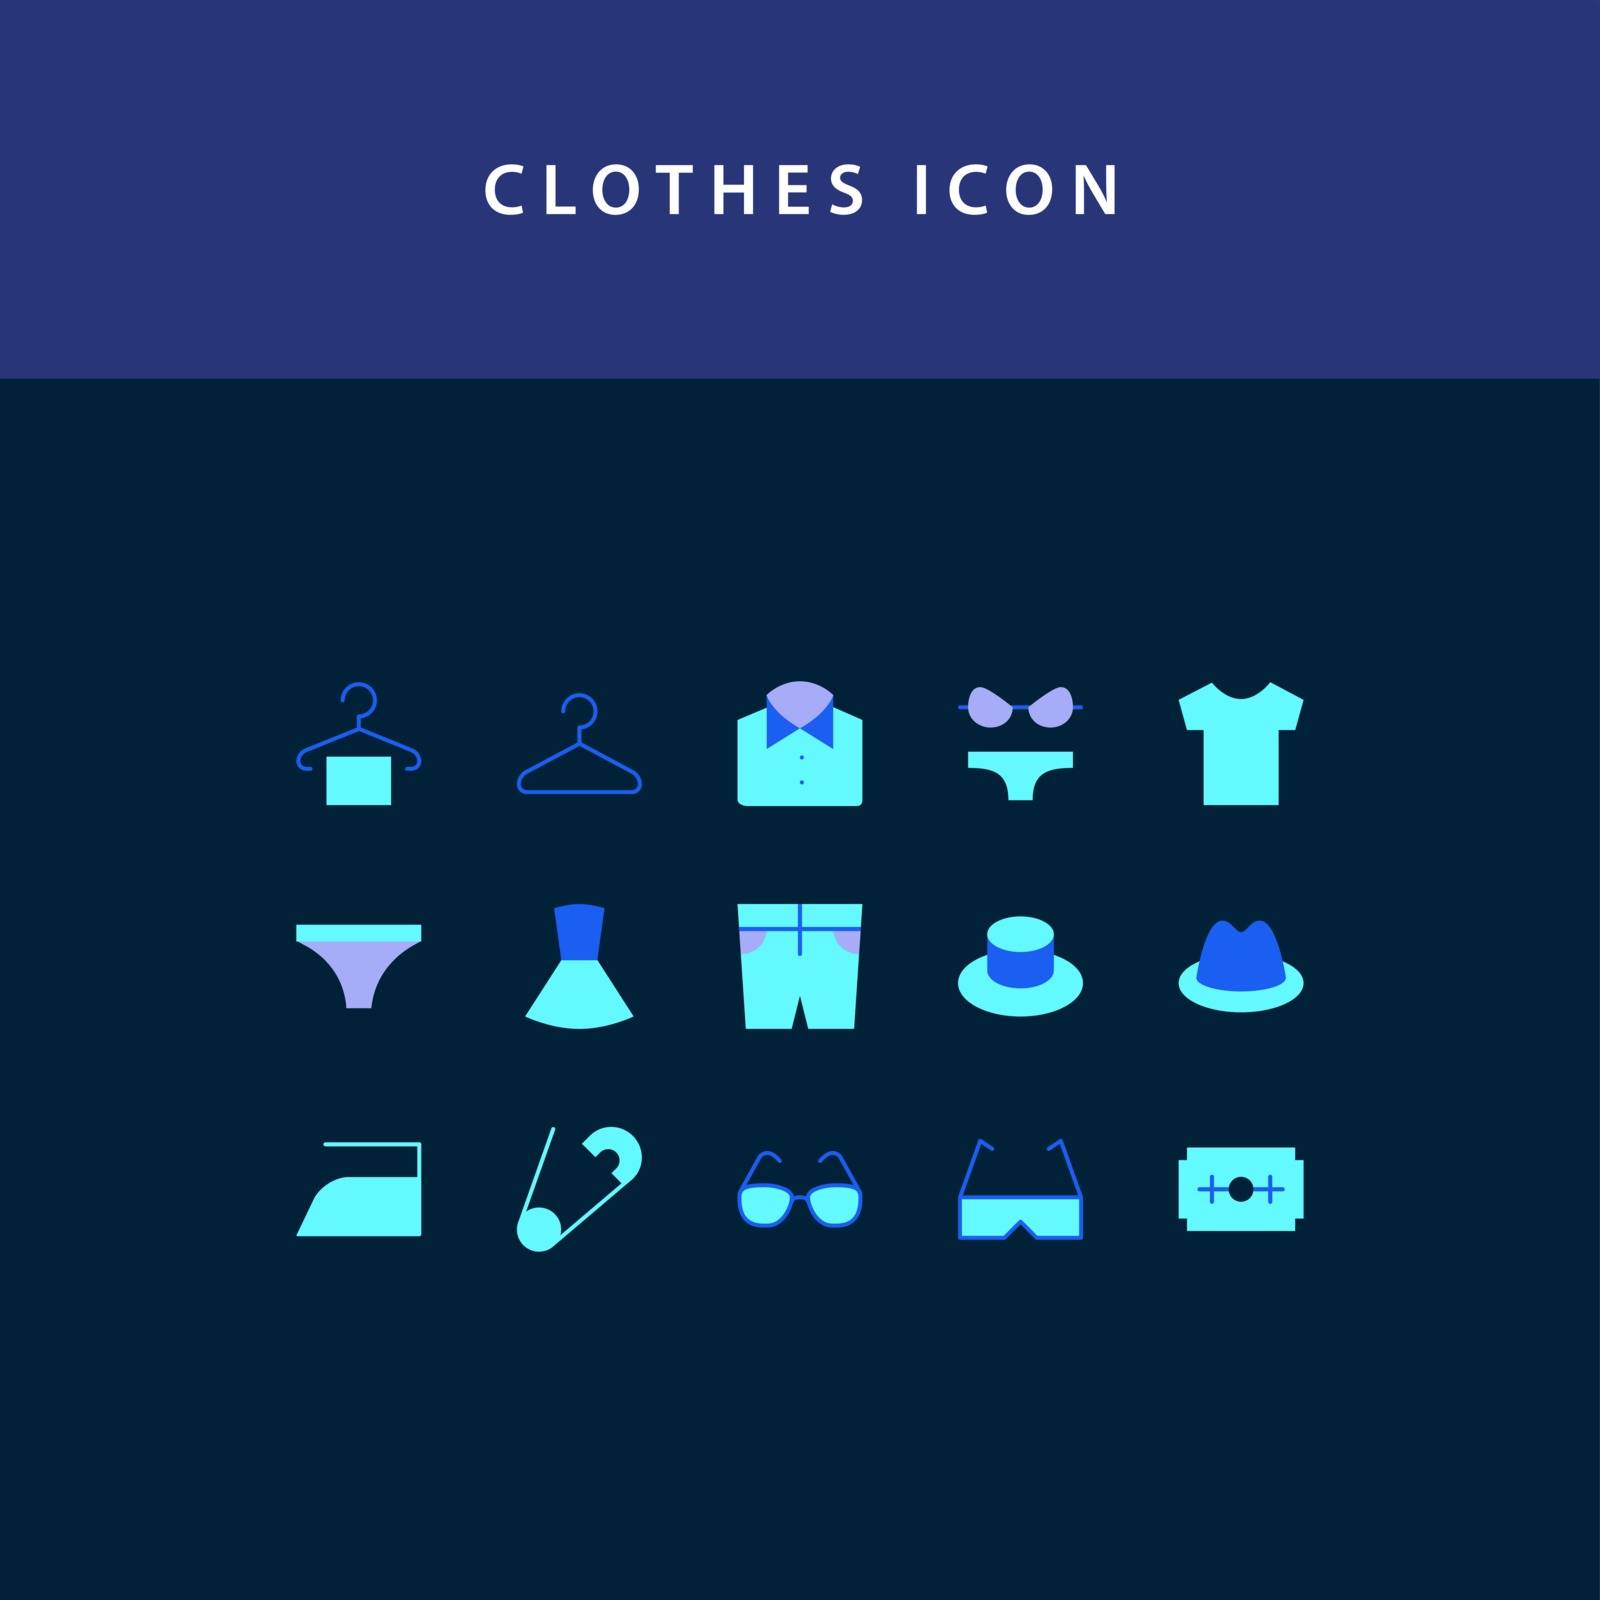 Clothes flat style design icon set by ANITA